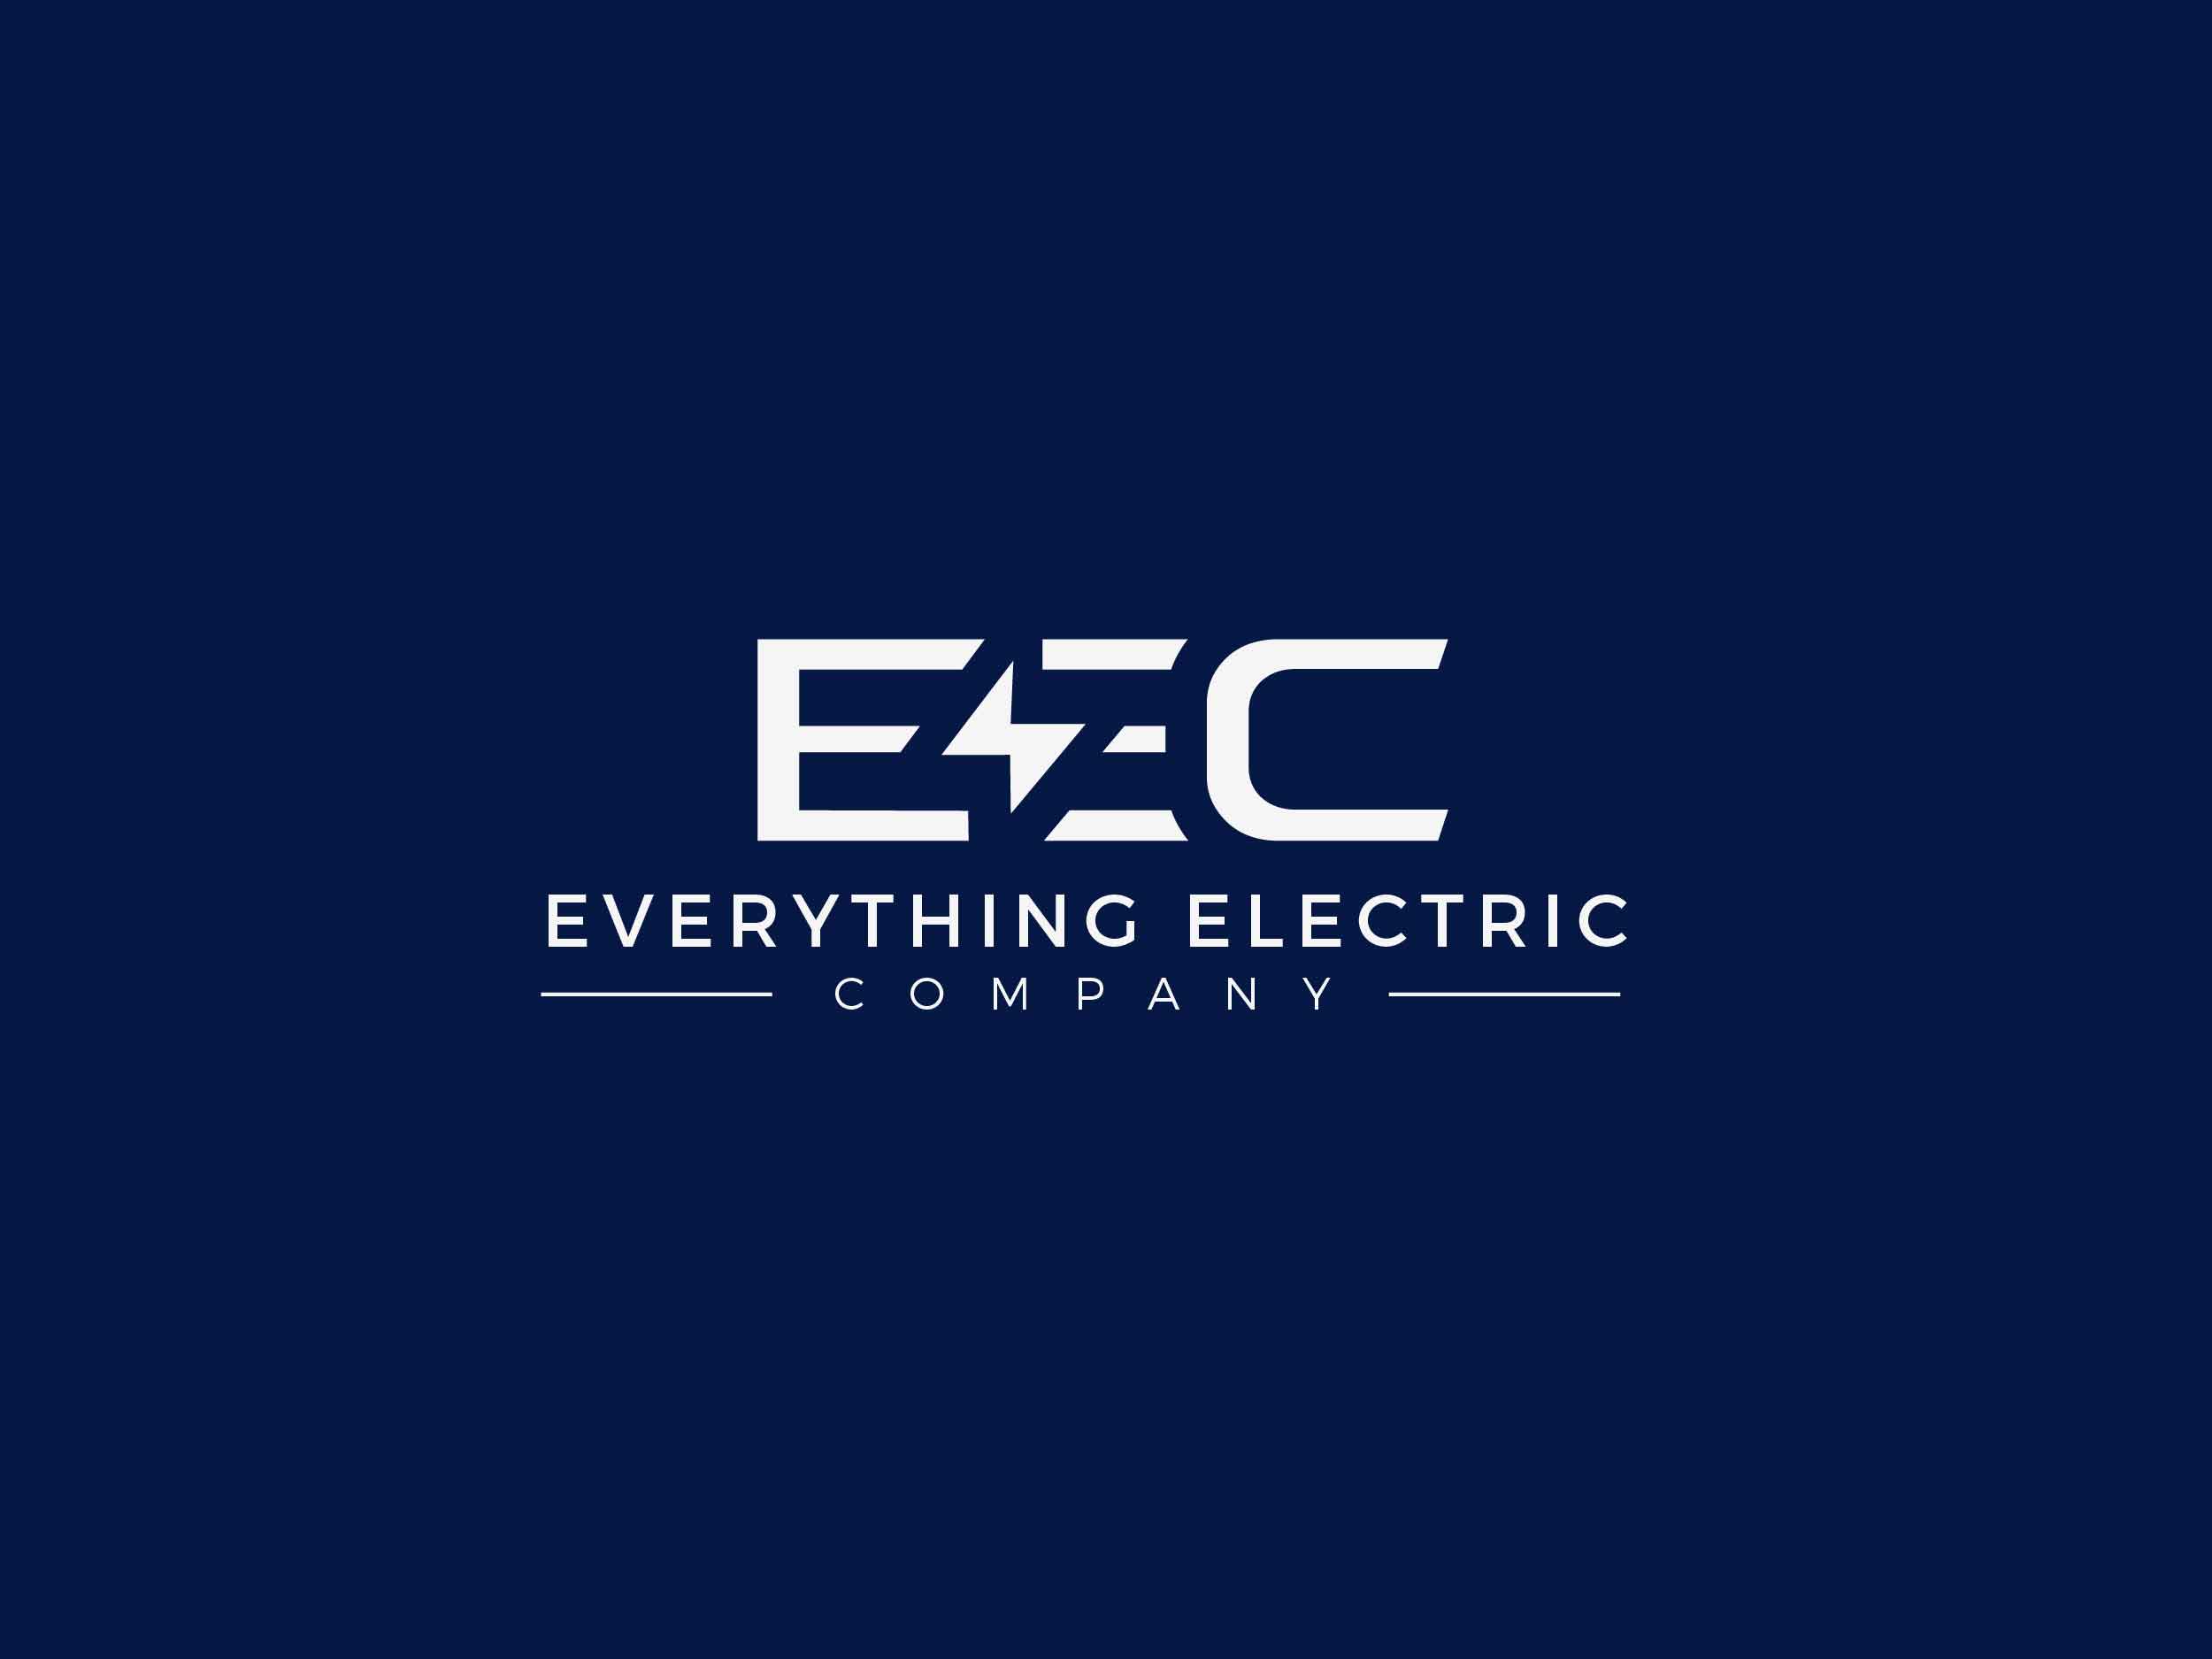 Everything Electric Company